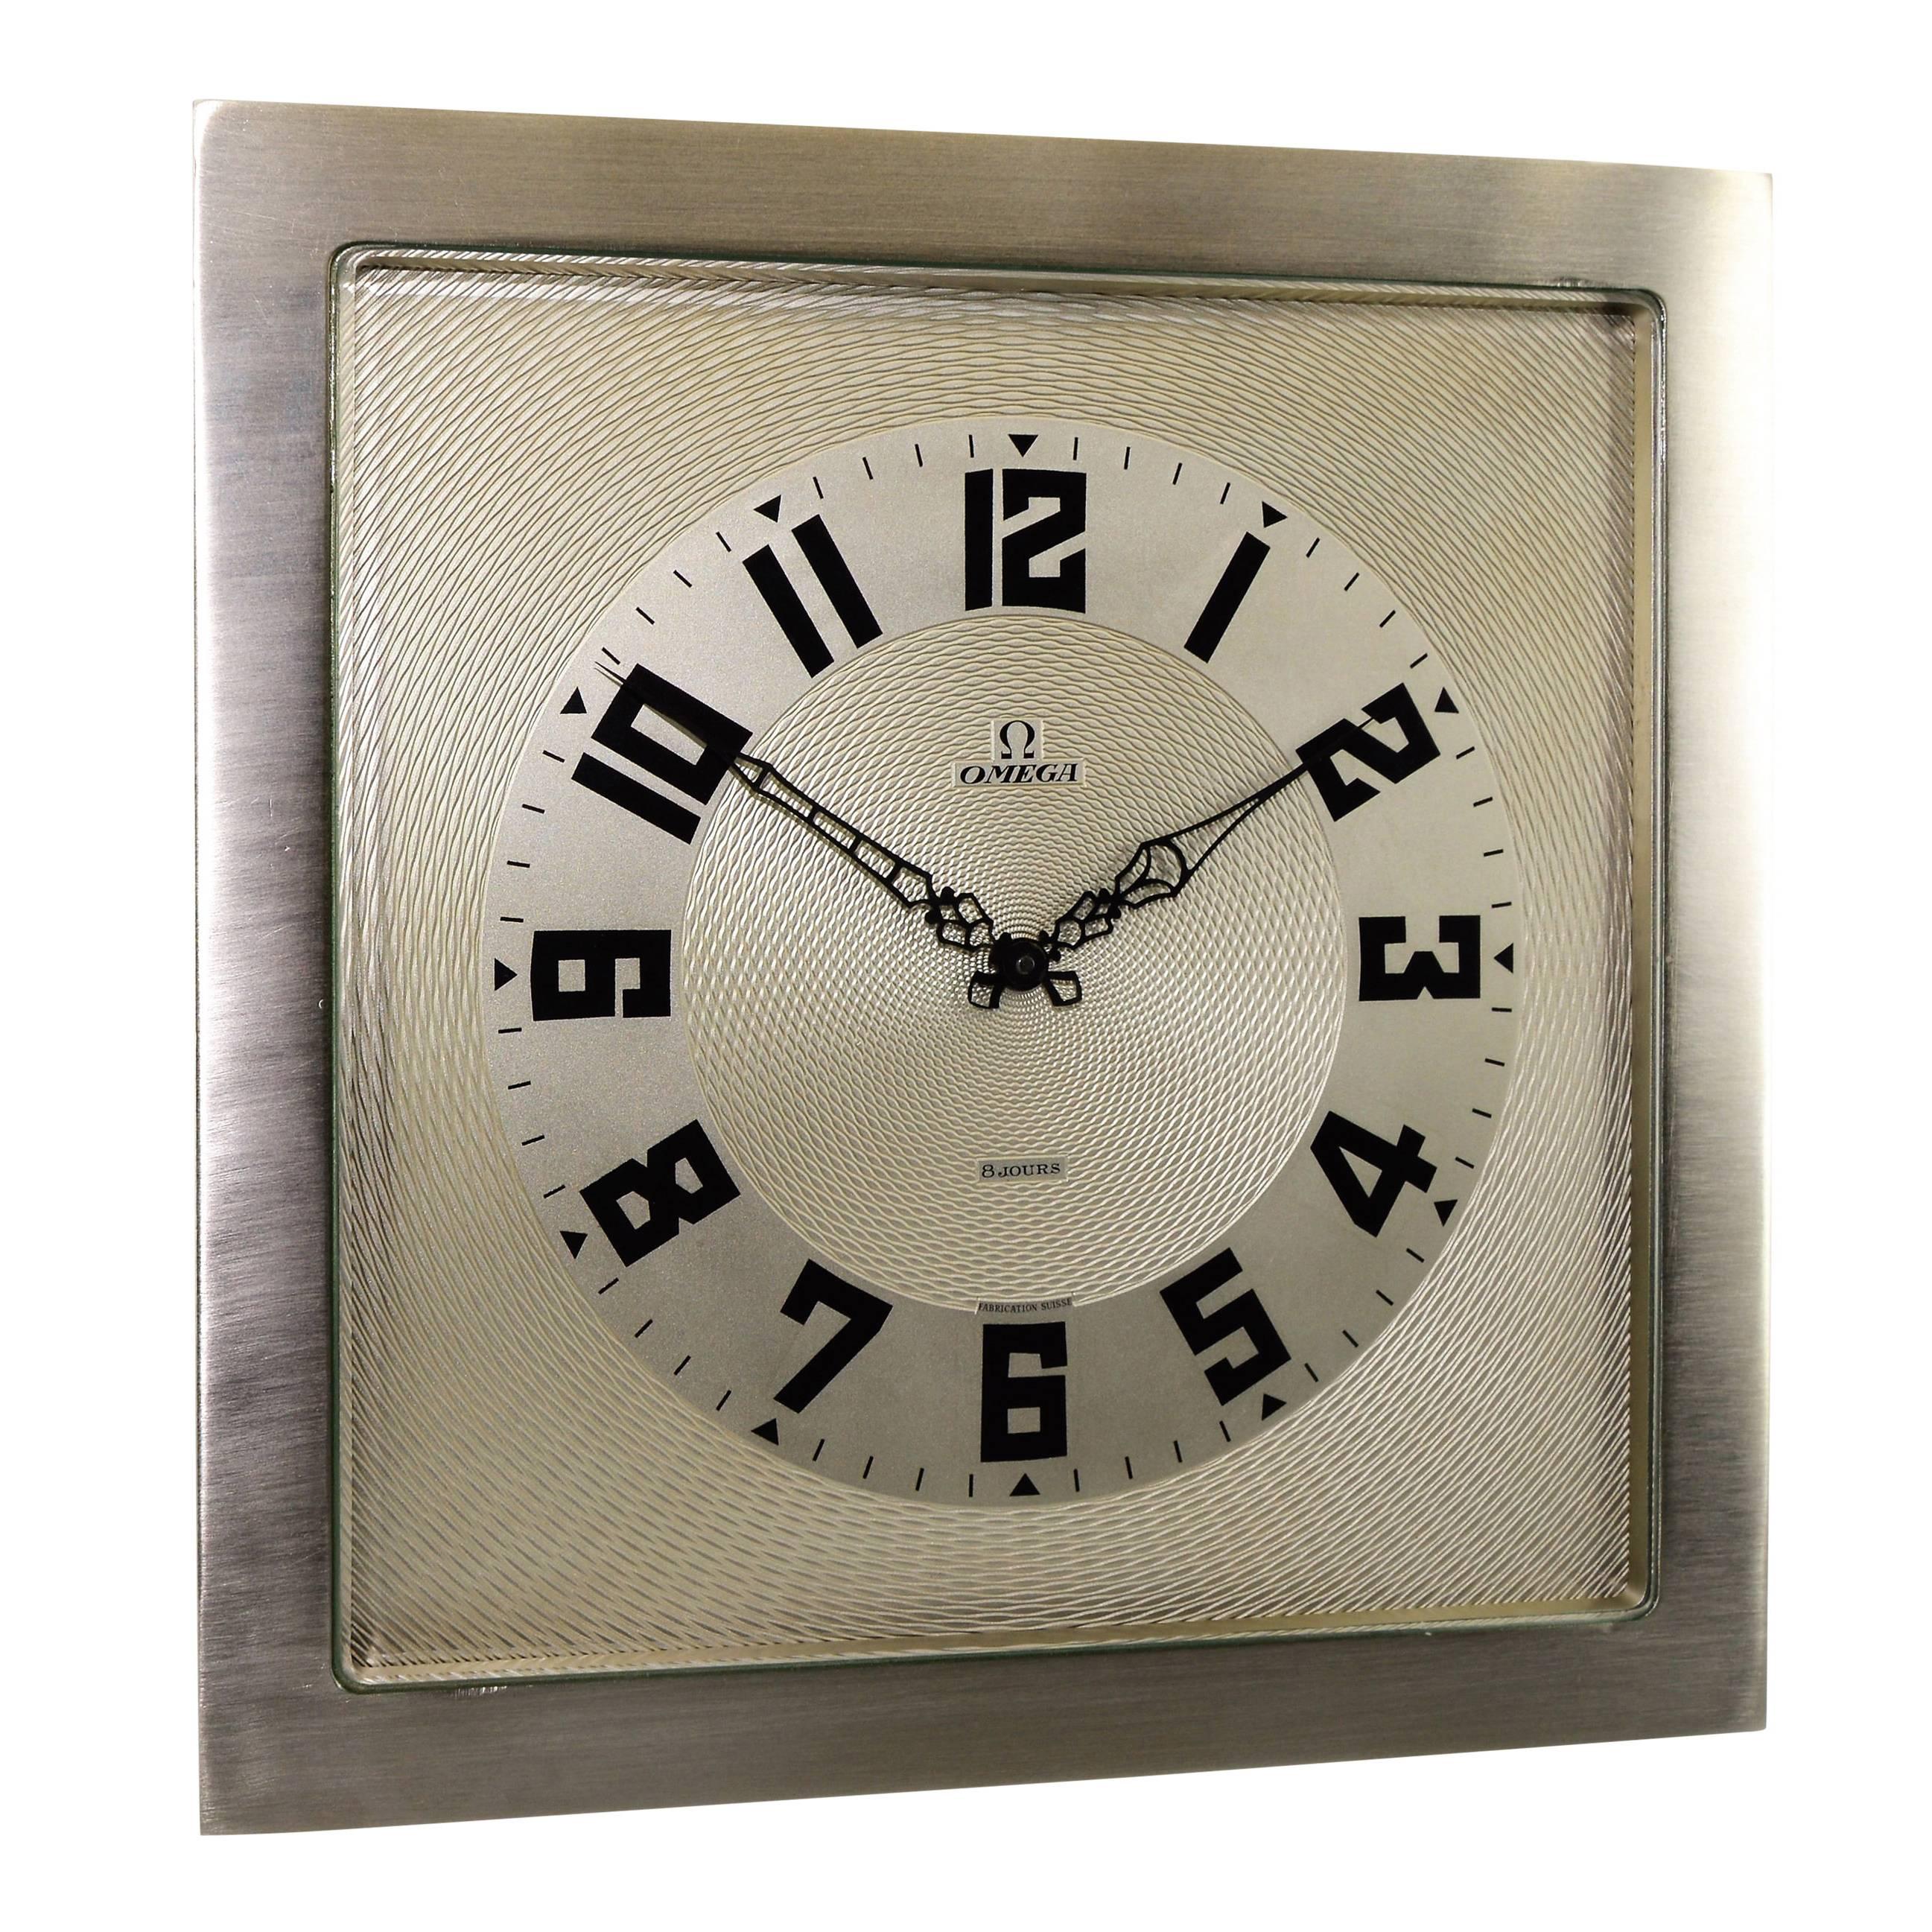 Omega Art Deco Desk Clock with Breguet Style Engine Turned Dial, 1930s 